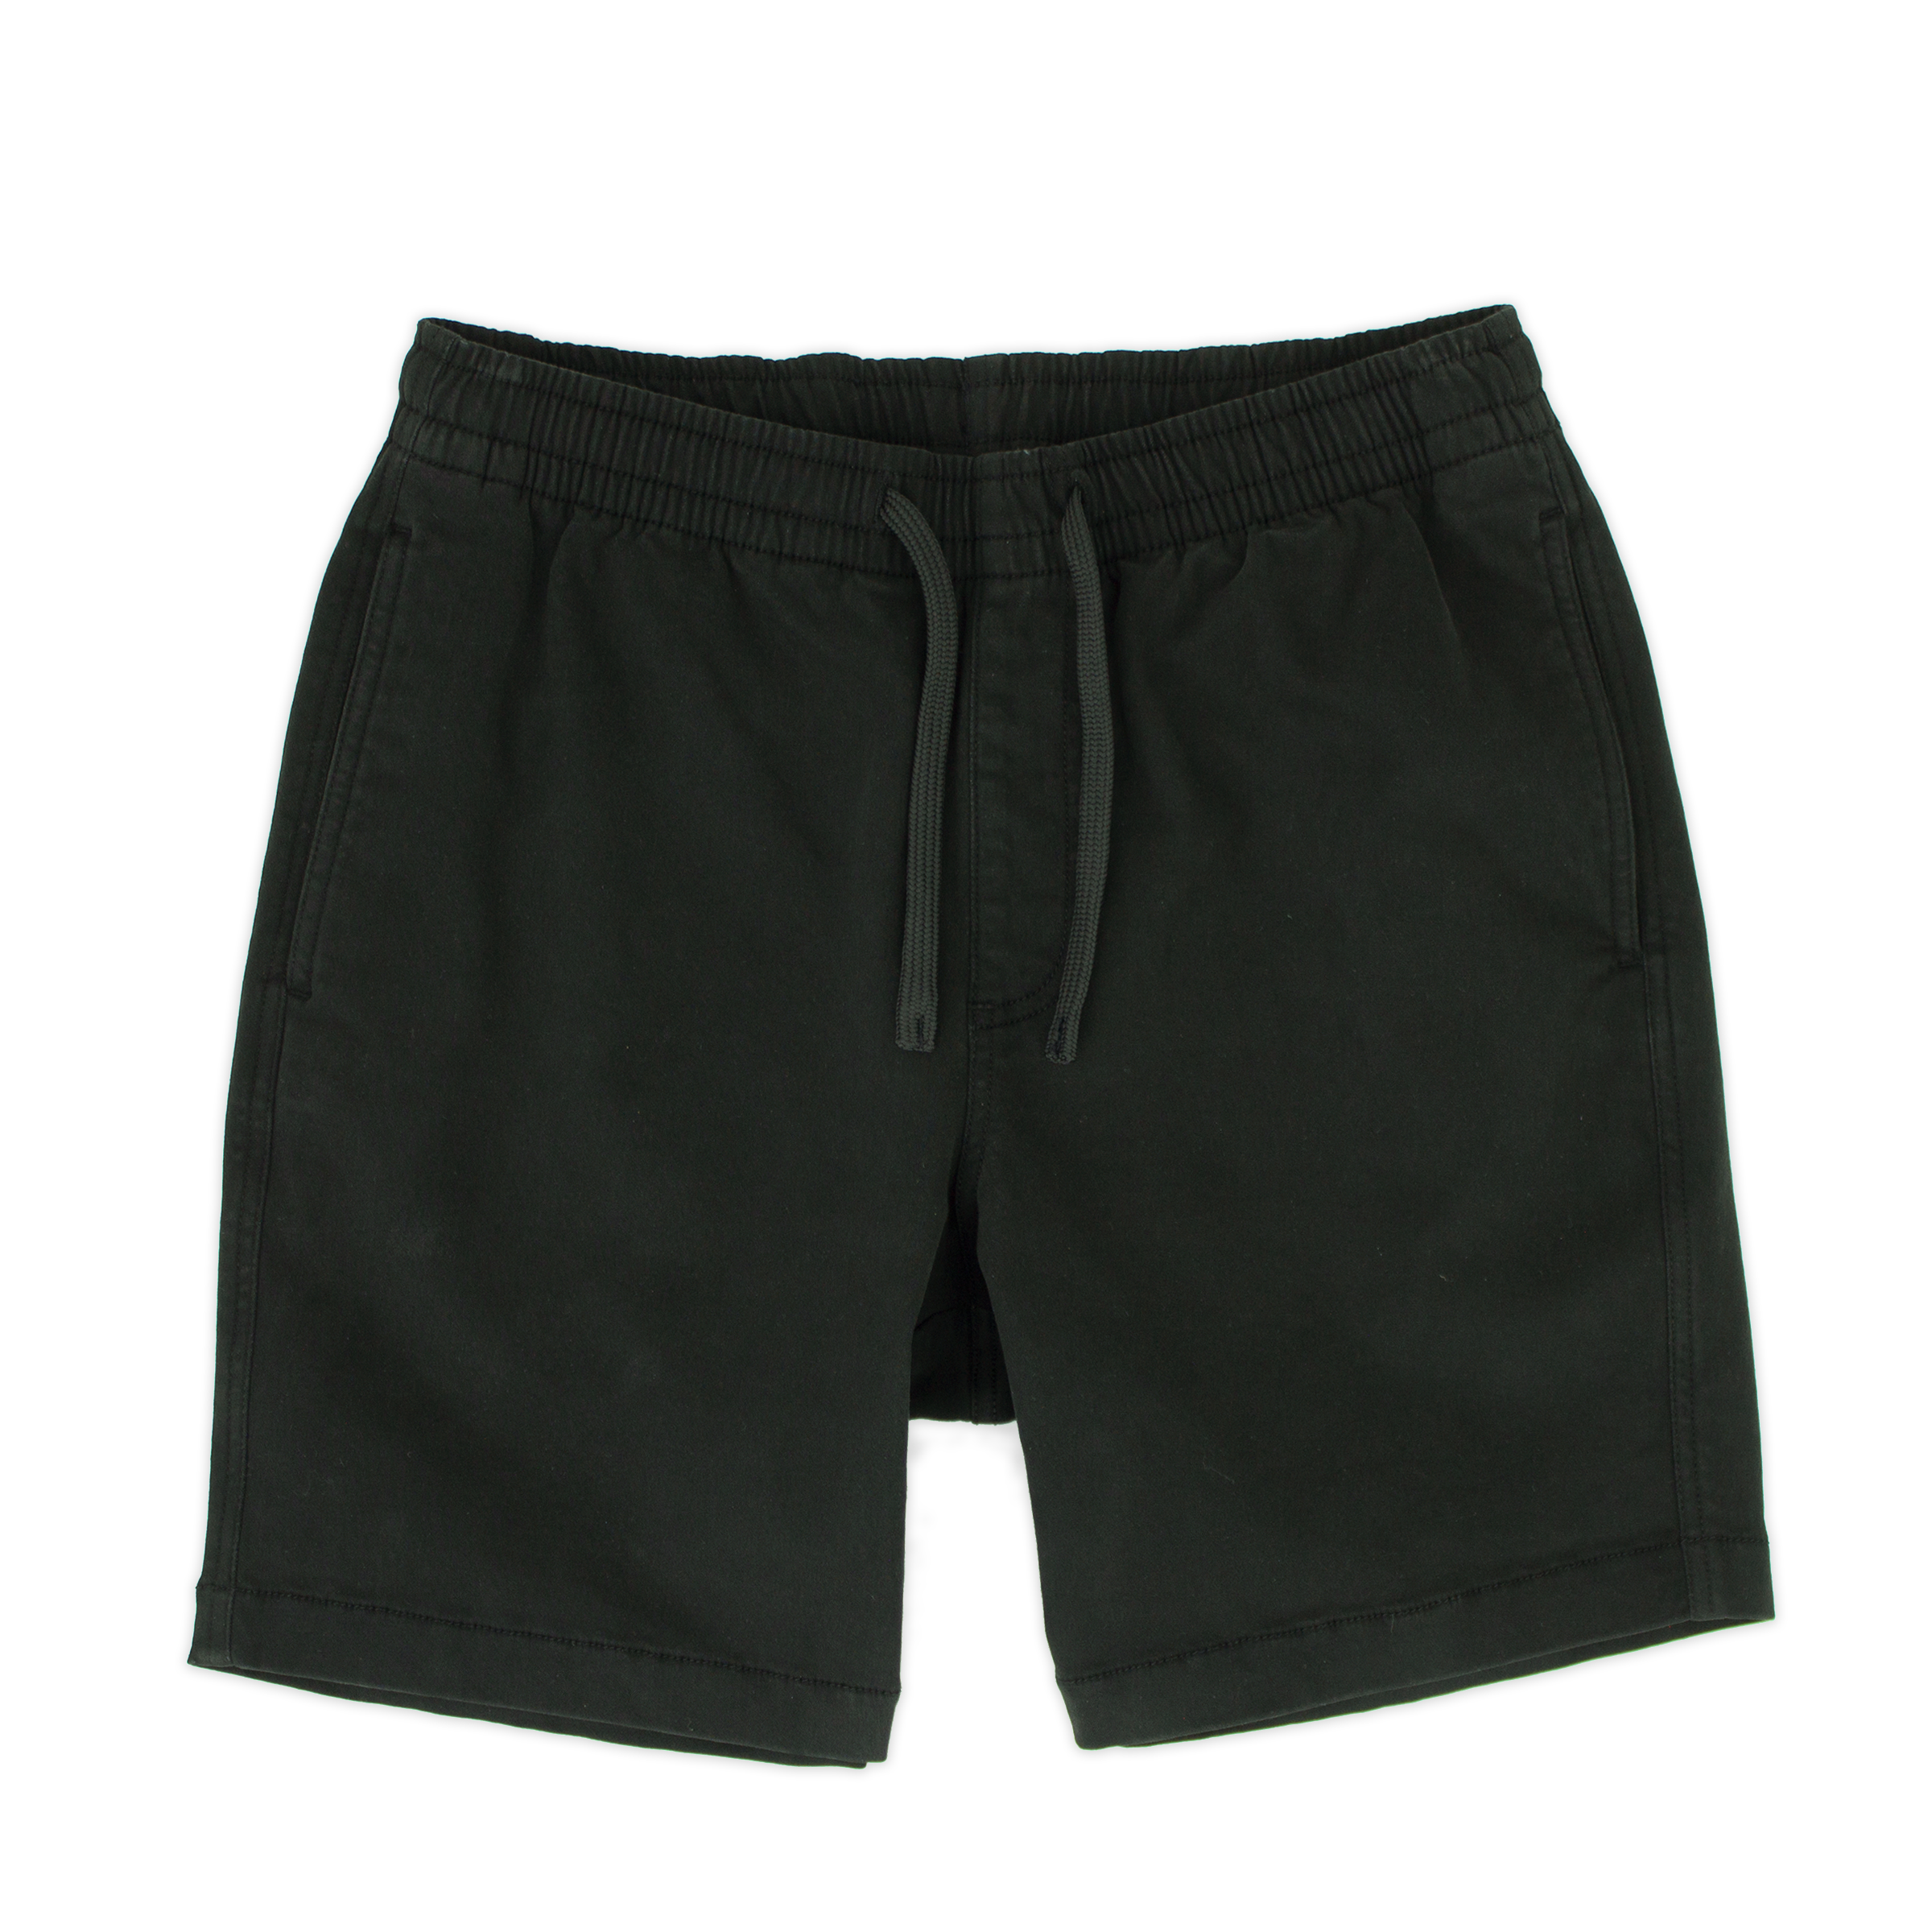 Alto Short 7" inseam in Black front with elastic waistband, fabric drawstring, faux fly, and two front side seam pockets